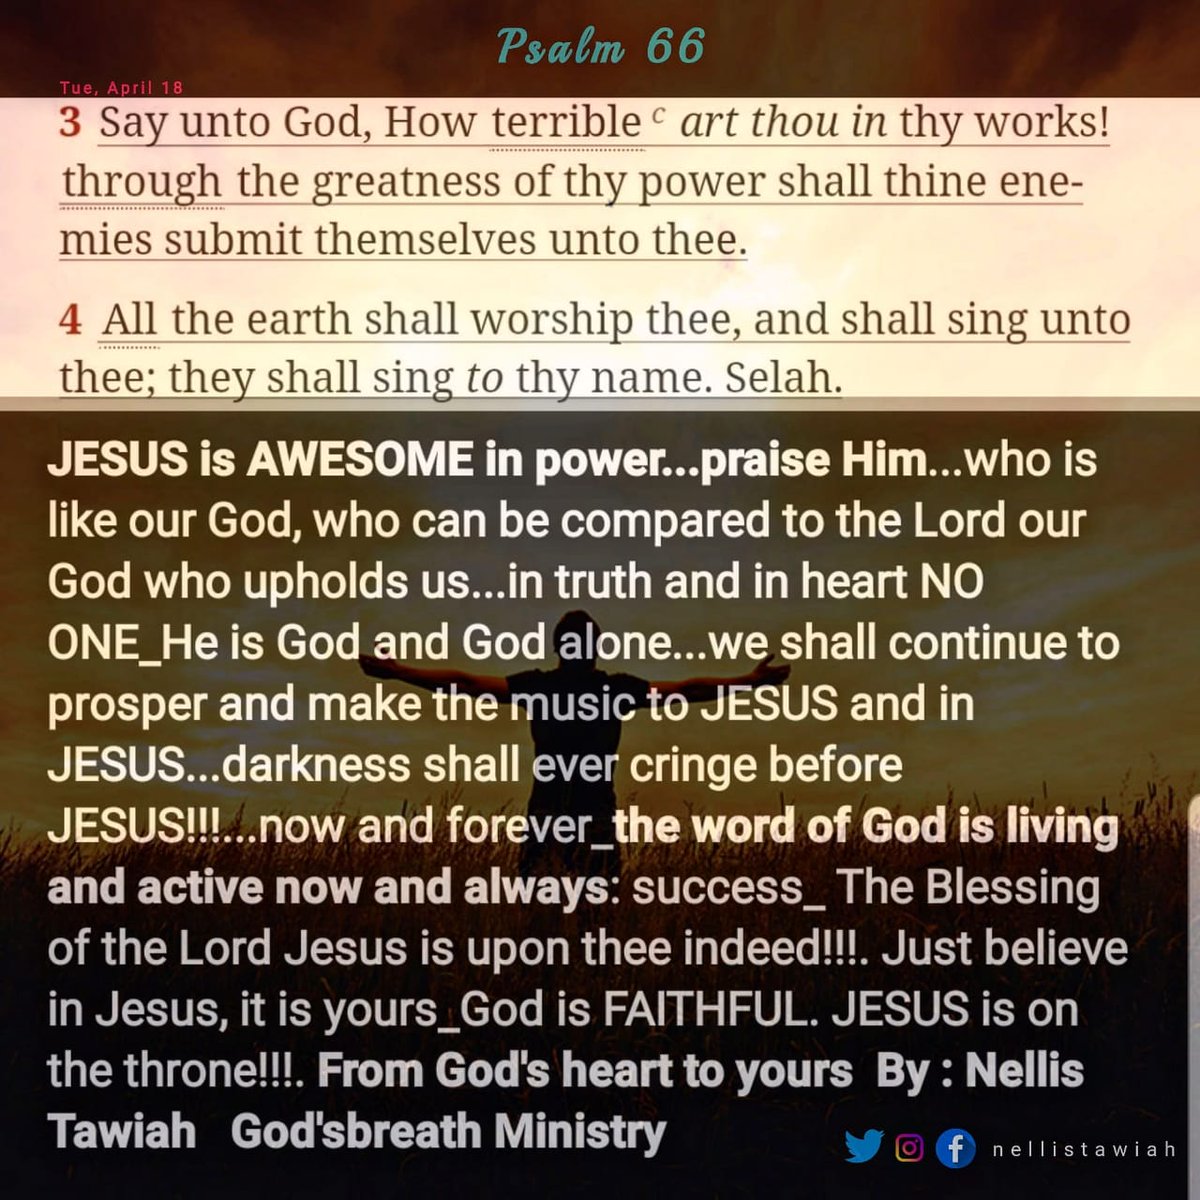 *JESUS is AWESOME in power...praise Him*

#Twitter #scripture #christian #dailyword #mercy #thepowerofGod #nellistawiah